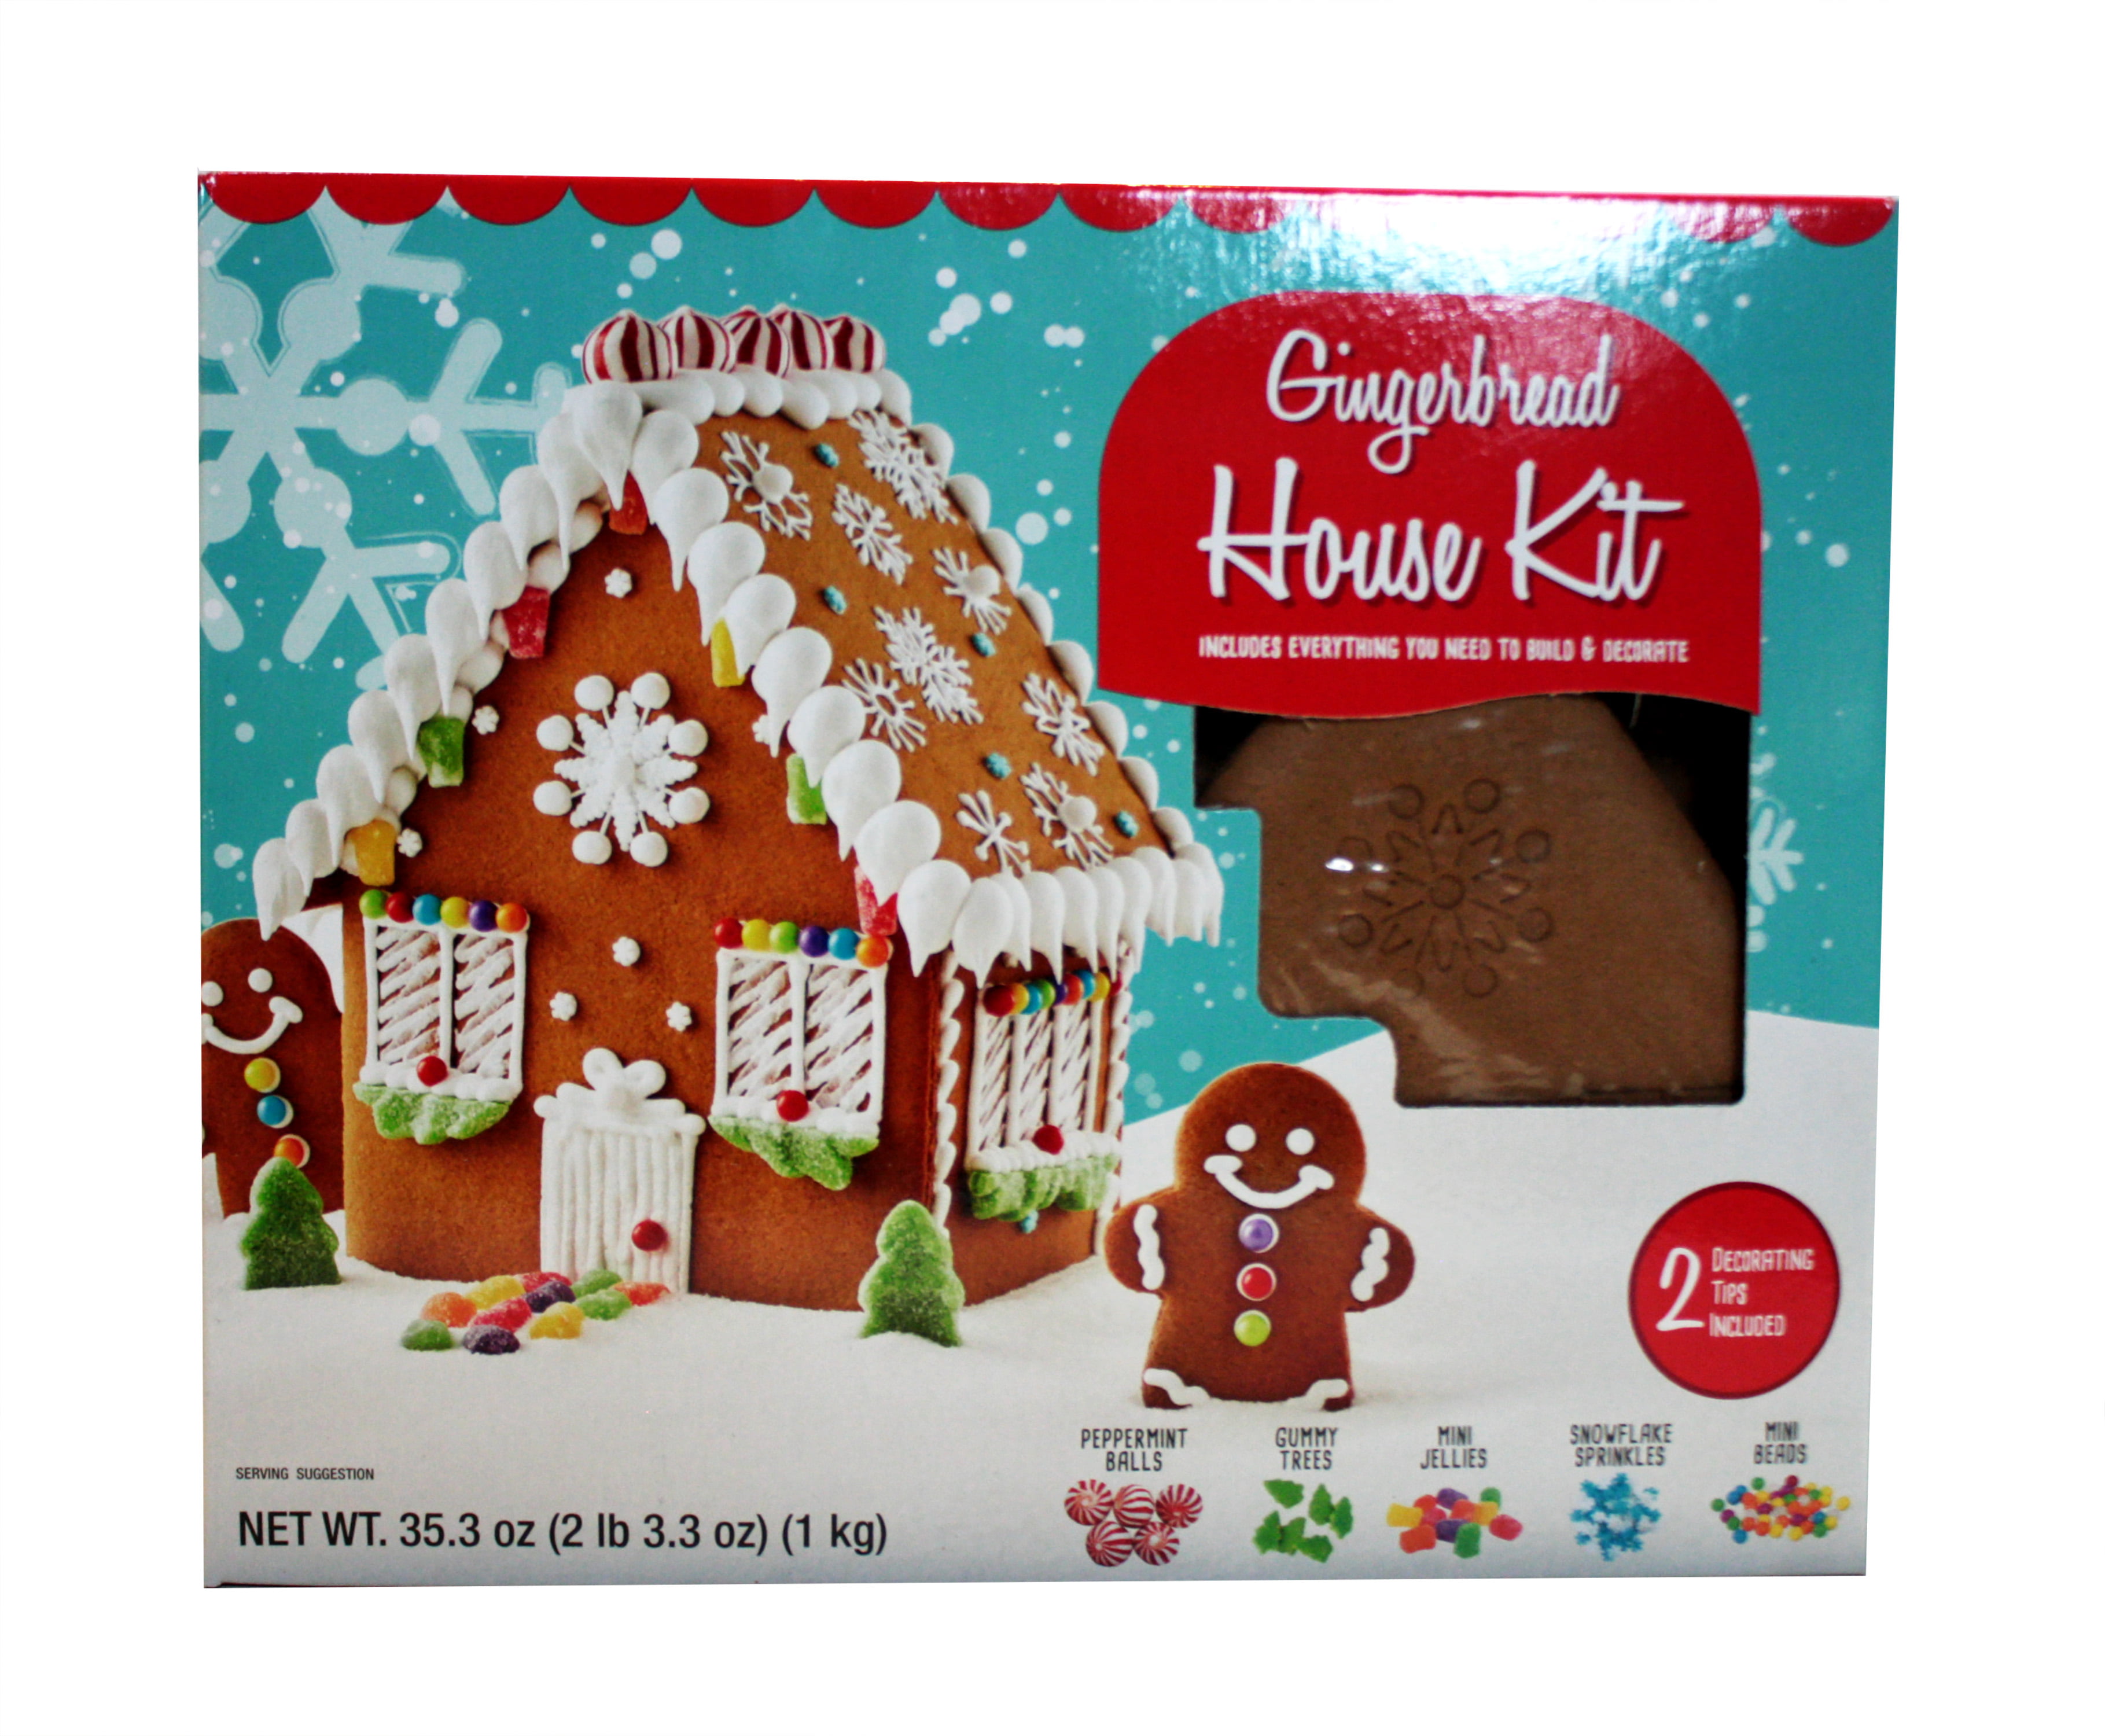 Chocolate gingerbread house kit